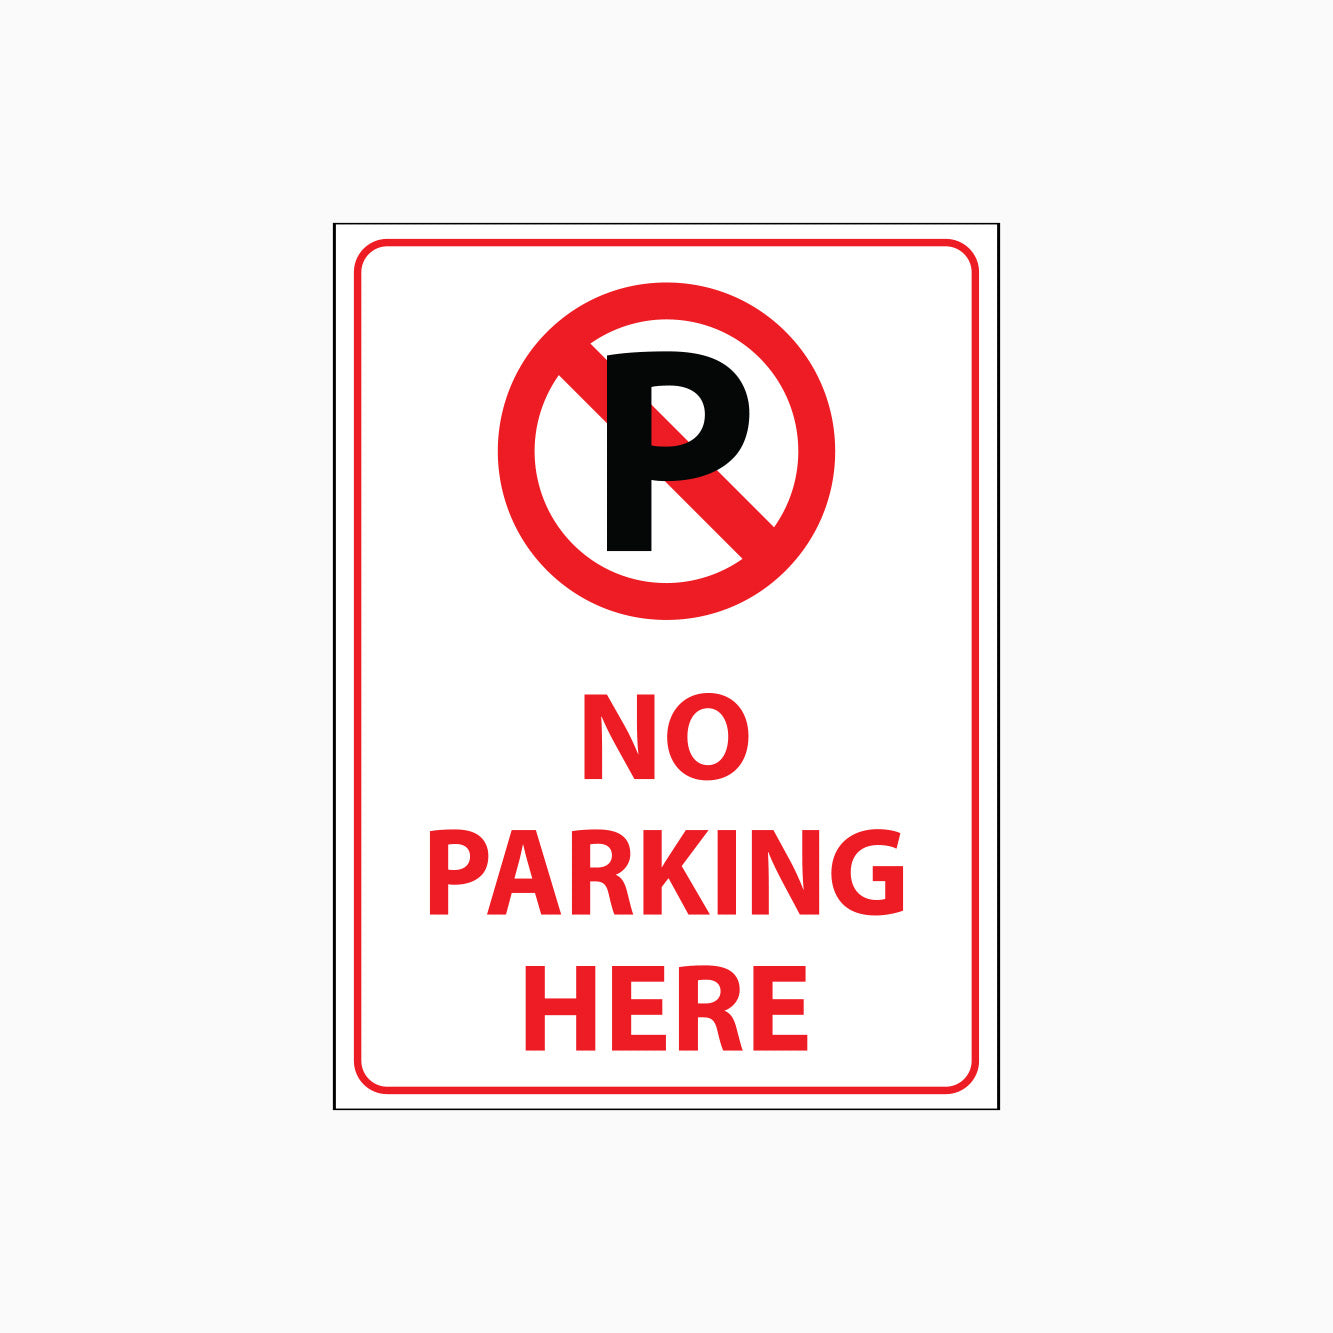 NO PARKING HERE SIGN - NO PARKING AND PARKING SIGNS - GET SIGNS - SHOP ONLINE